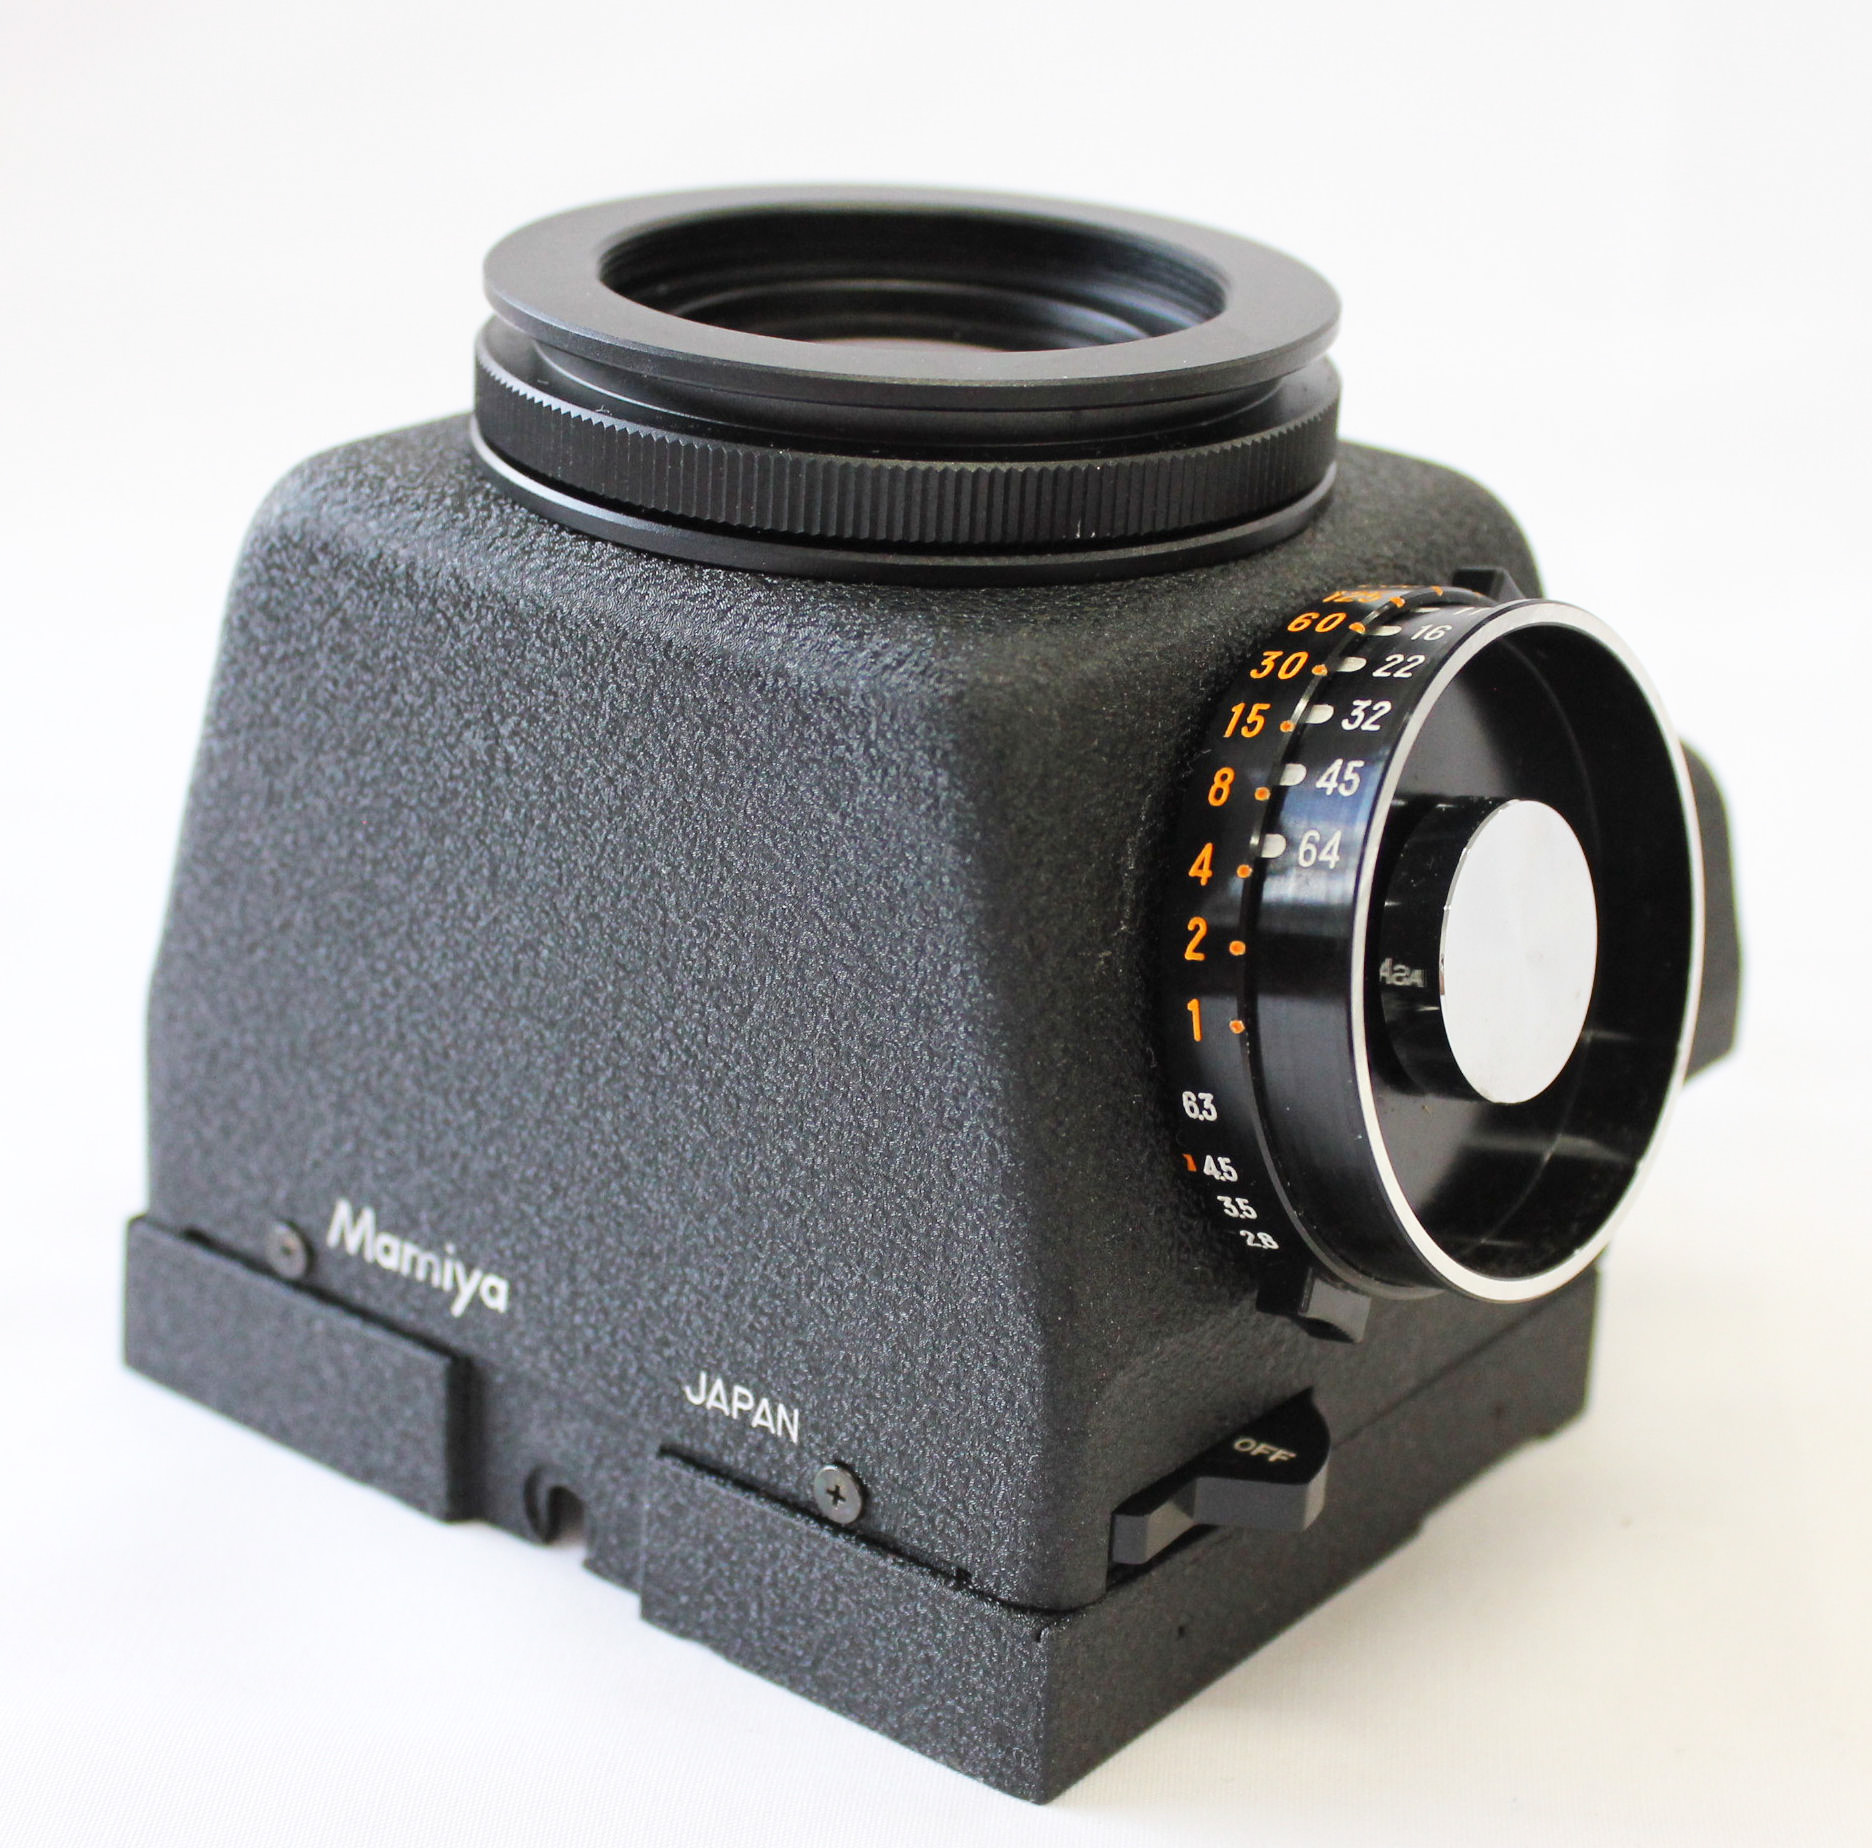 Mamiya CdS Magnifying Hood Finder for C330 C220 TLR with Case from Japan Photo 3